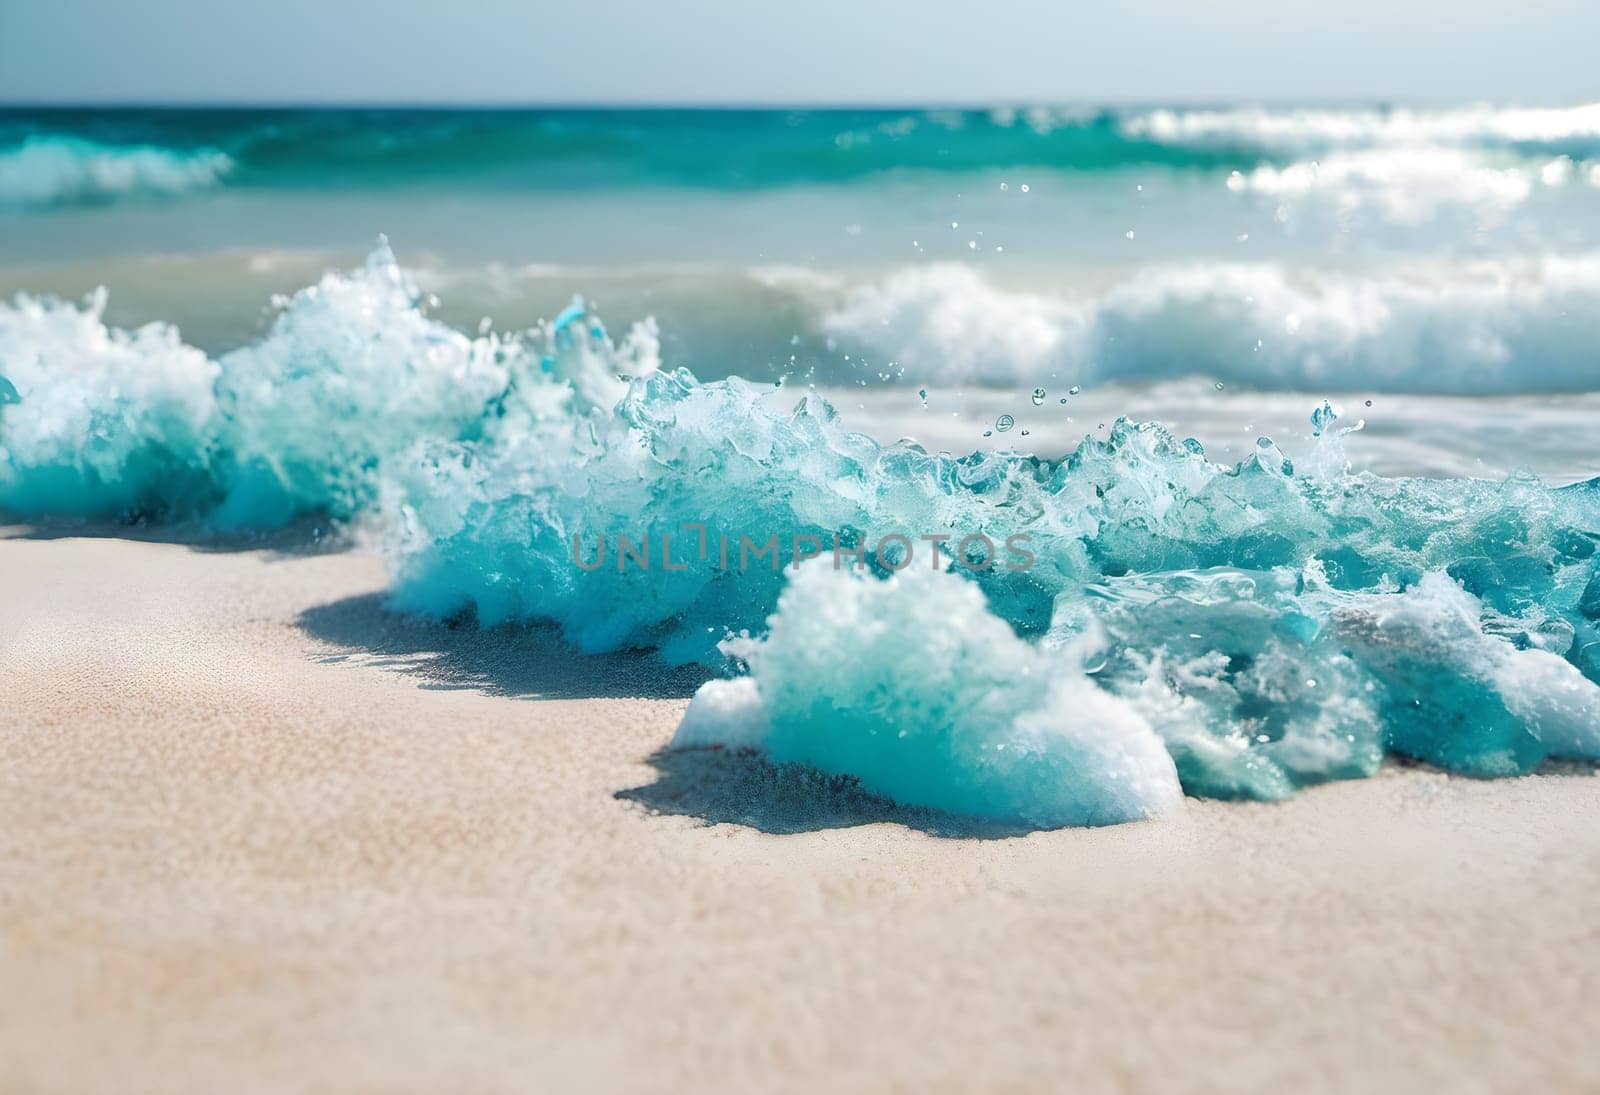 Summer Escapes: Exploring Seascapes and Sandy Shores by Petrichor